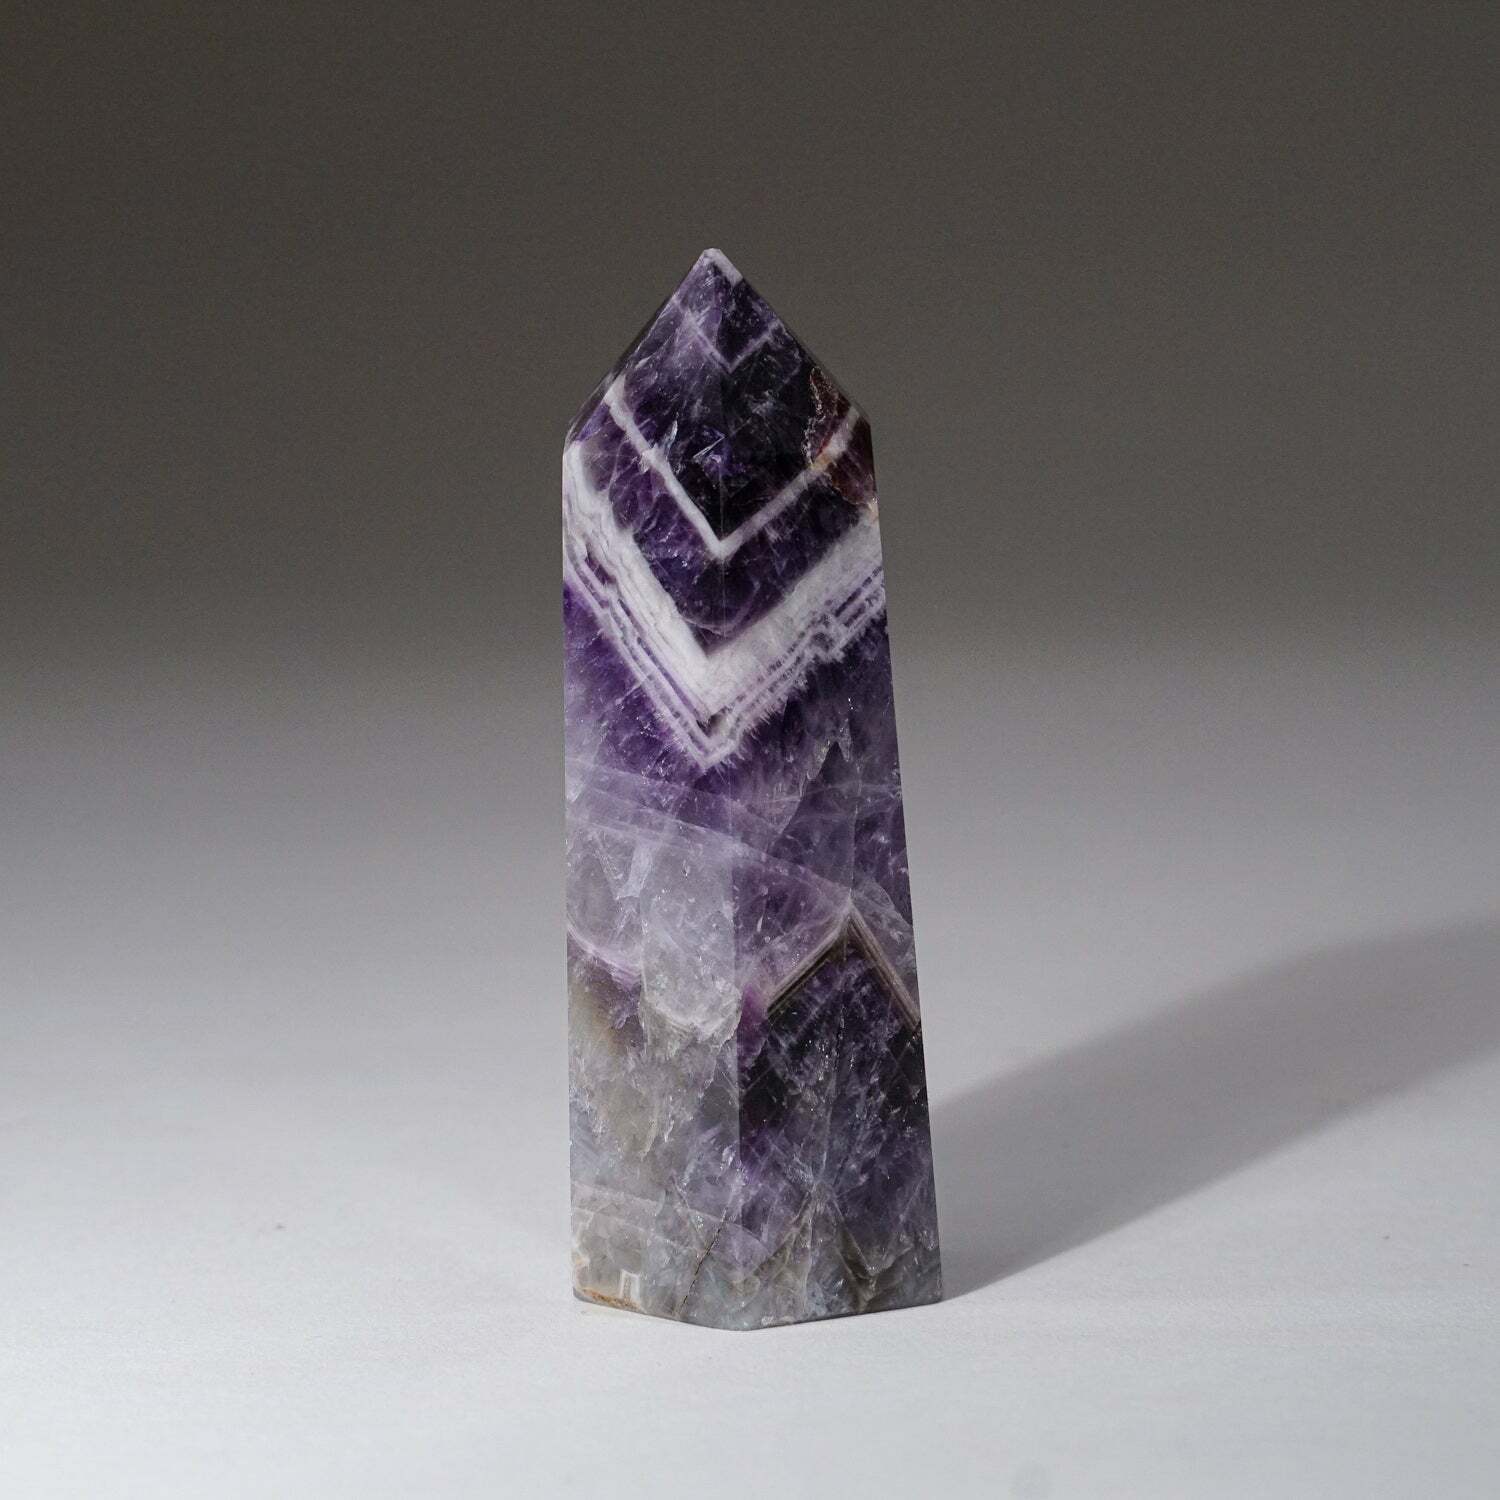 Polished Chevron Amethyst Point from Brazil (146.2 grams)